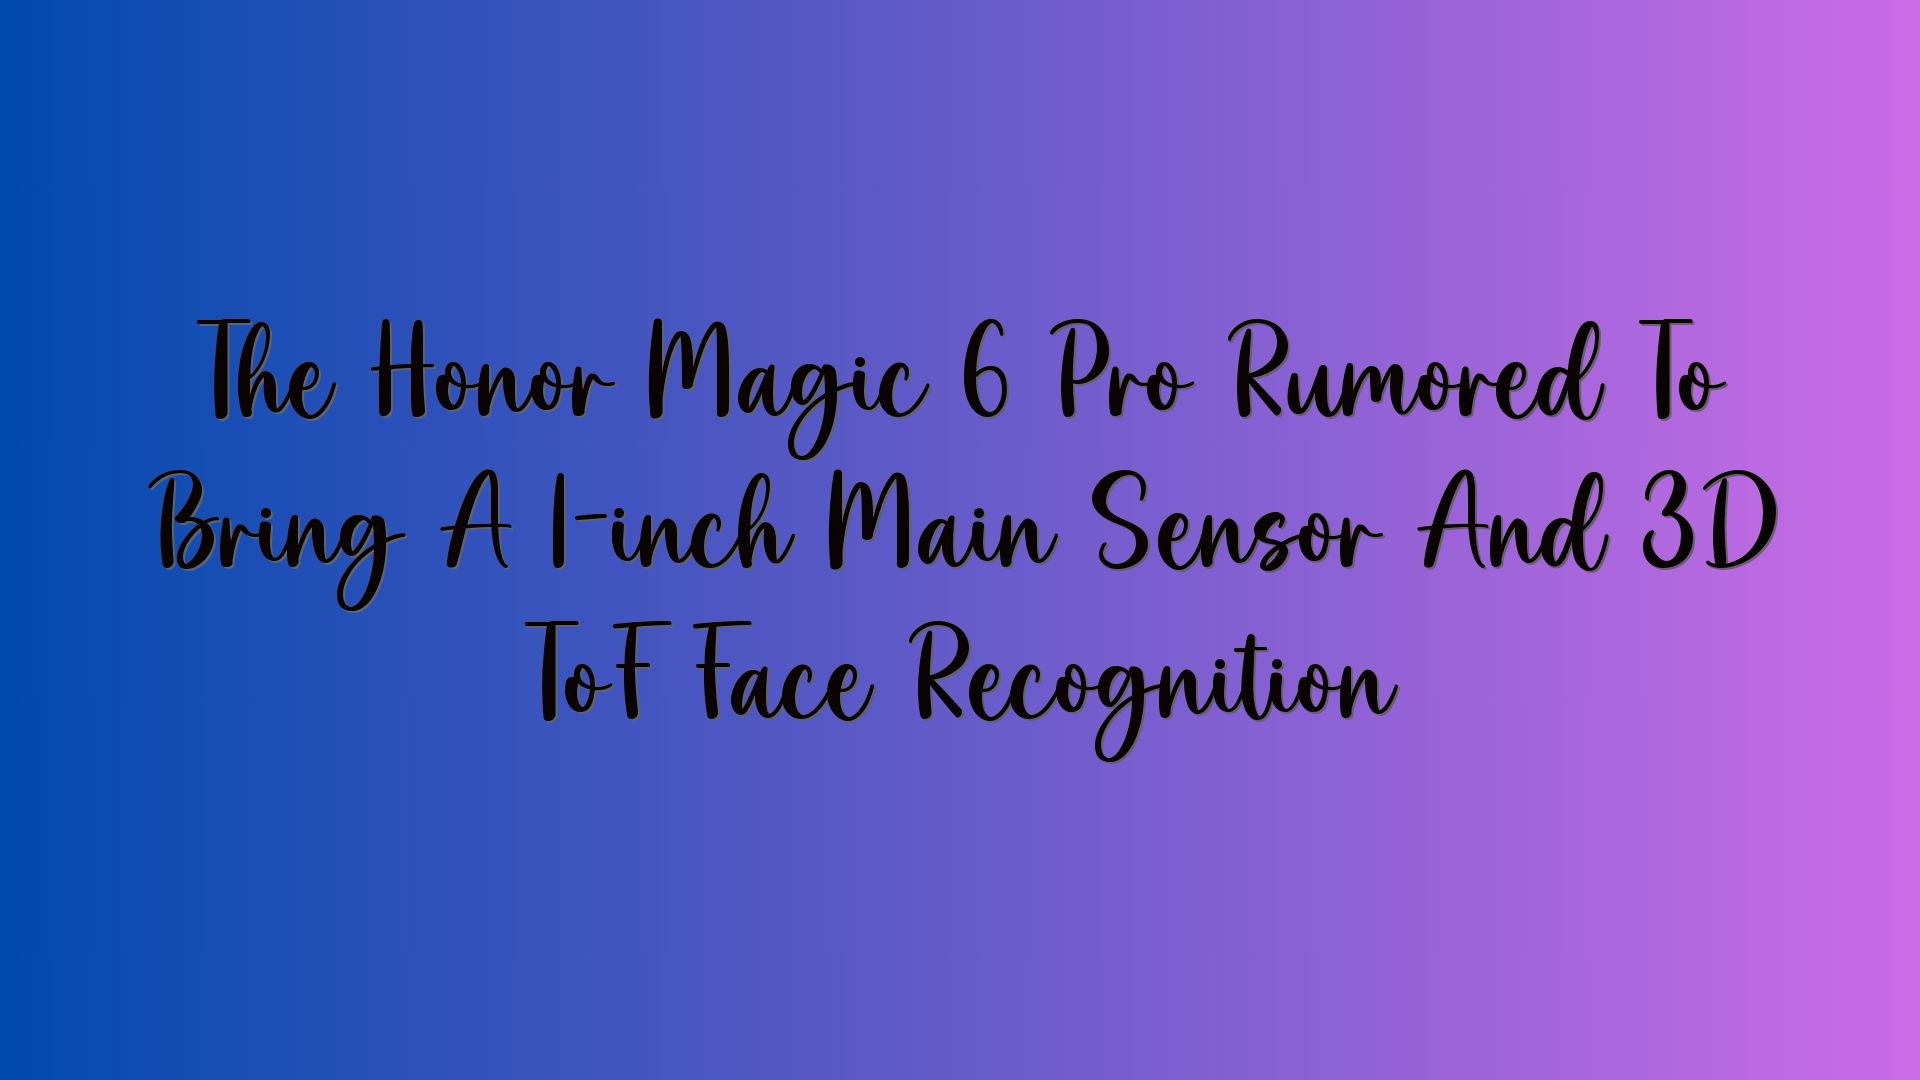 The Honor Magic 6 Pro Rumored To Bring A 1-inch Main Sensor And 3D ToF Face Recognition